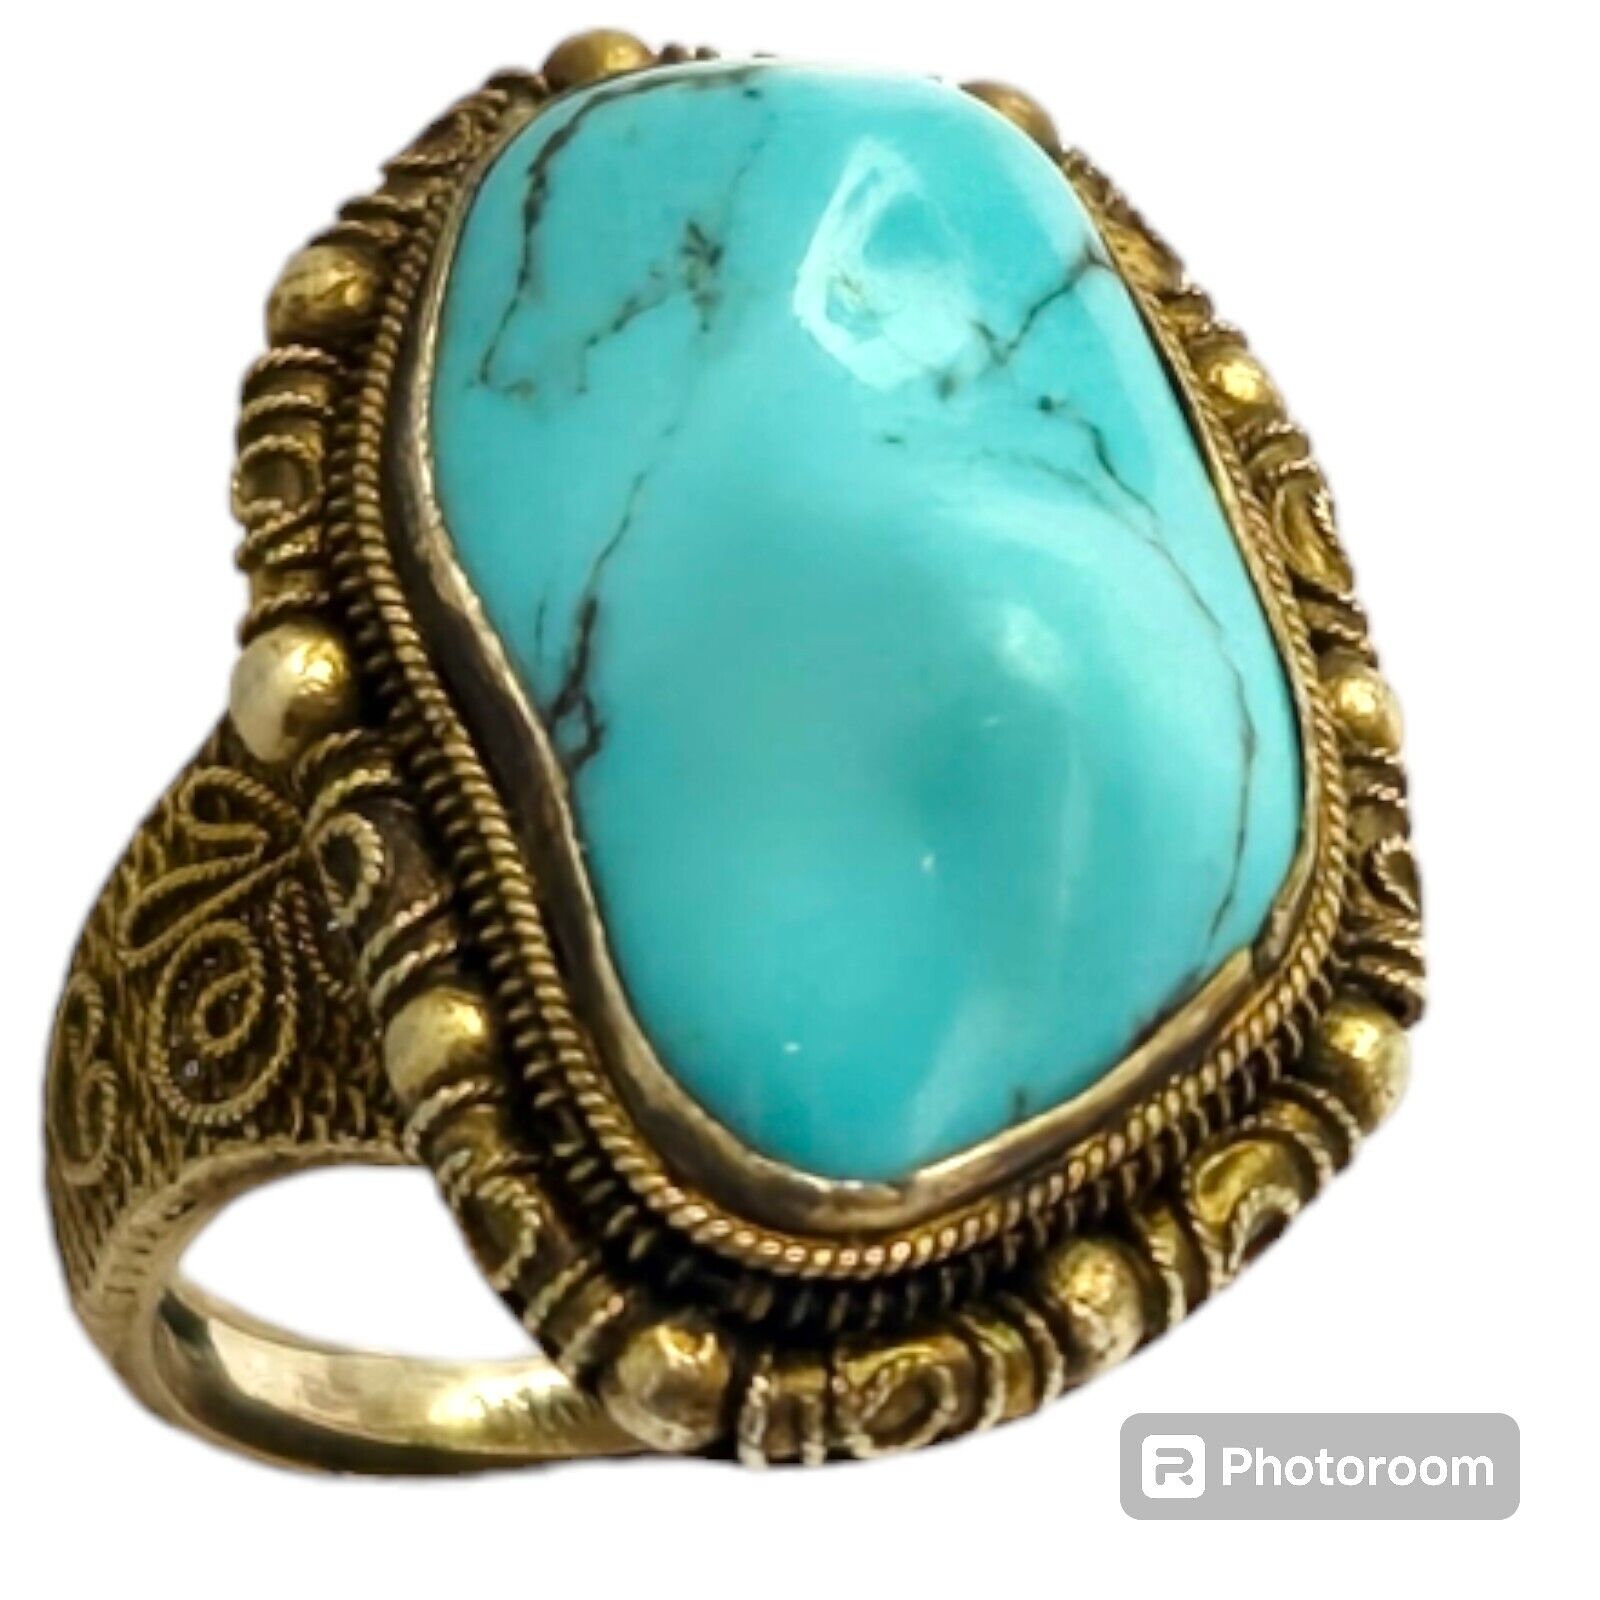 Important Chinese Export Sterling Silver Filigree Turquoise Nugget Ringsz9